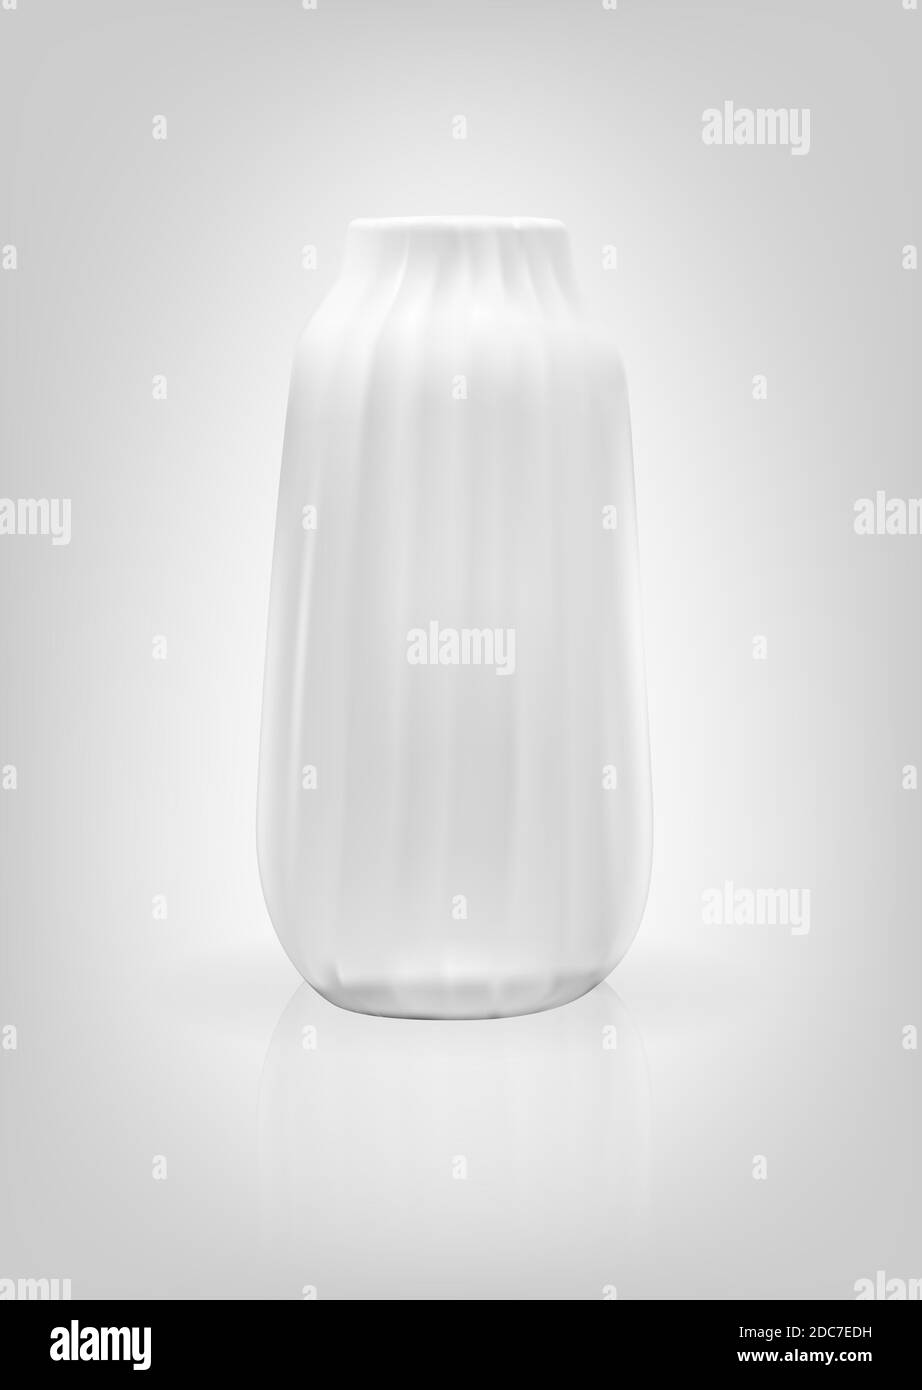 Realistic 3D model of vase white color on gray background. Illustration. Stock Photo